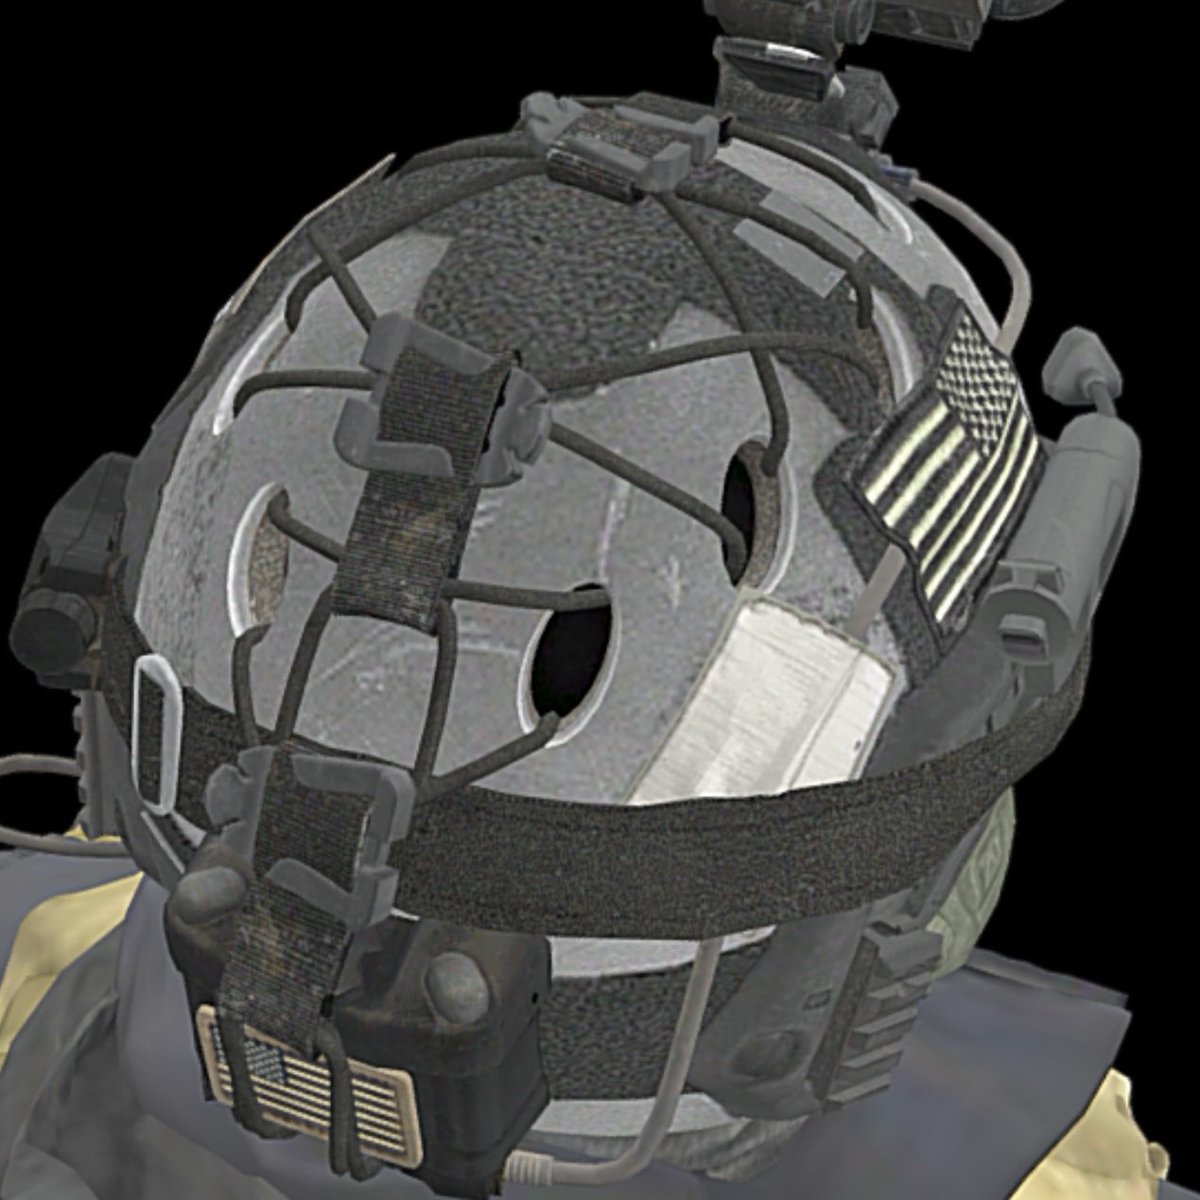 Helmet Retention Bungees are a bitch to attach and make accurate but look oh so cool.